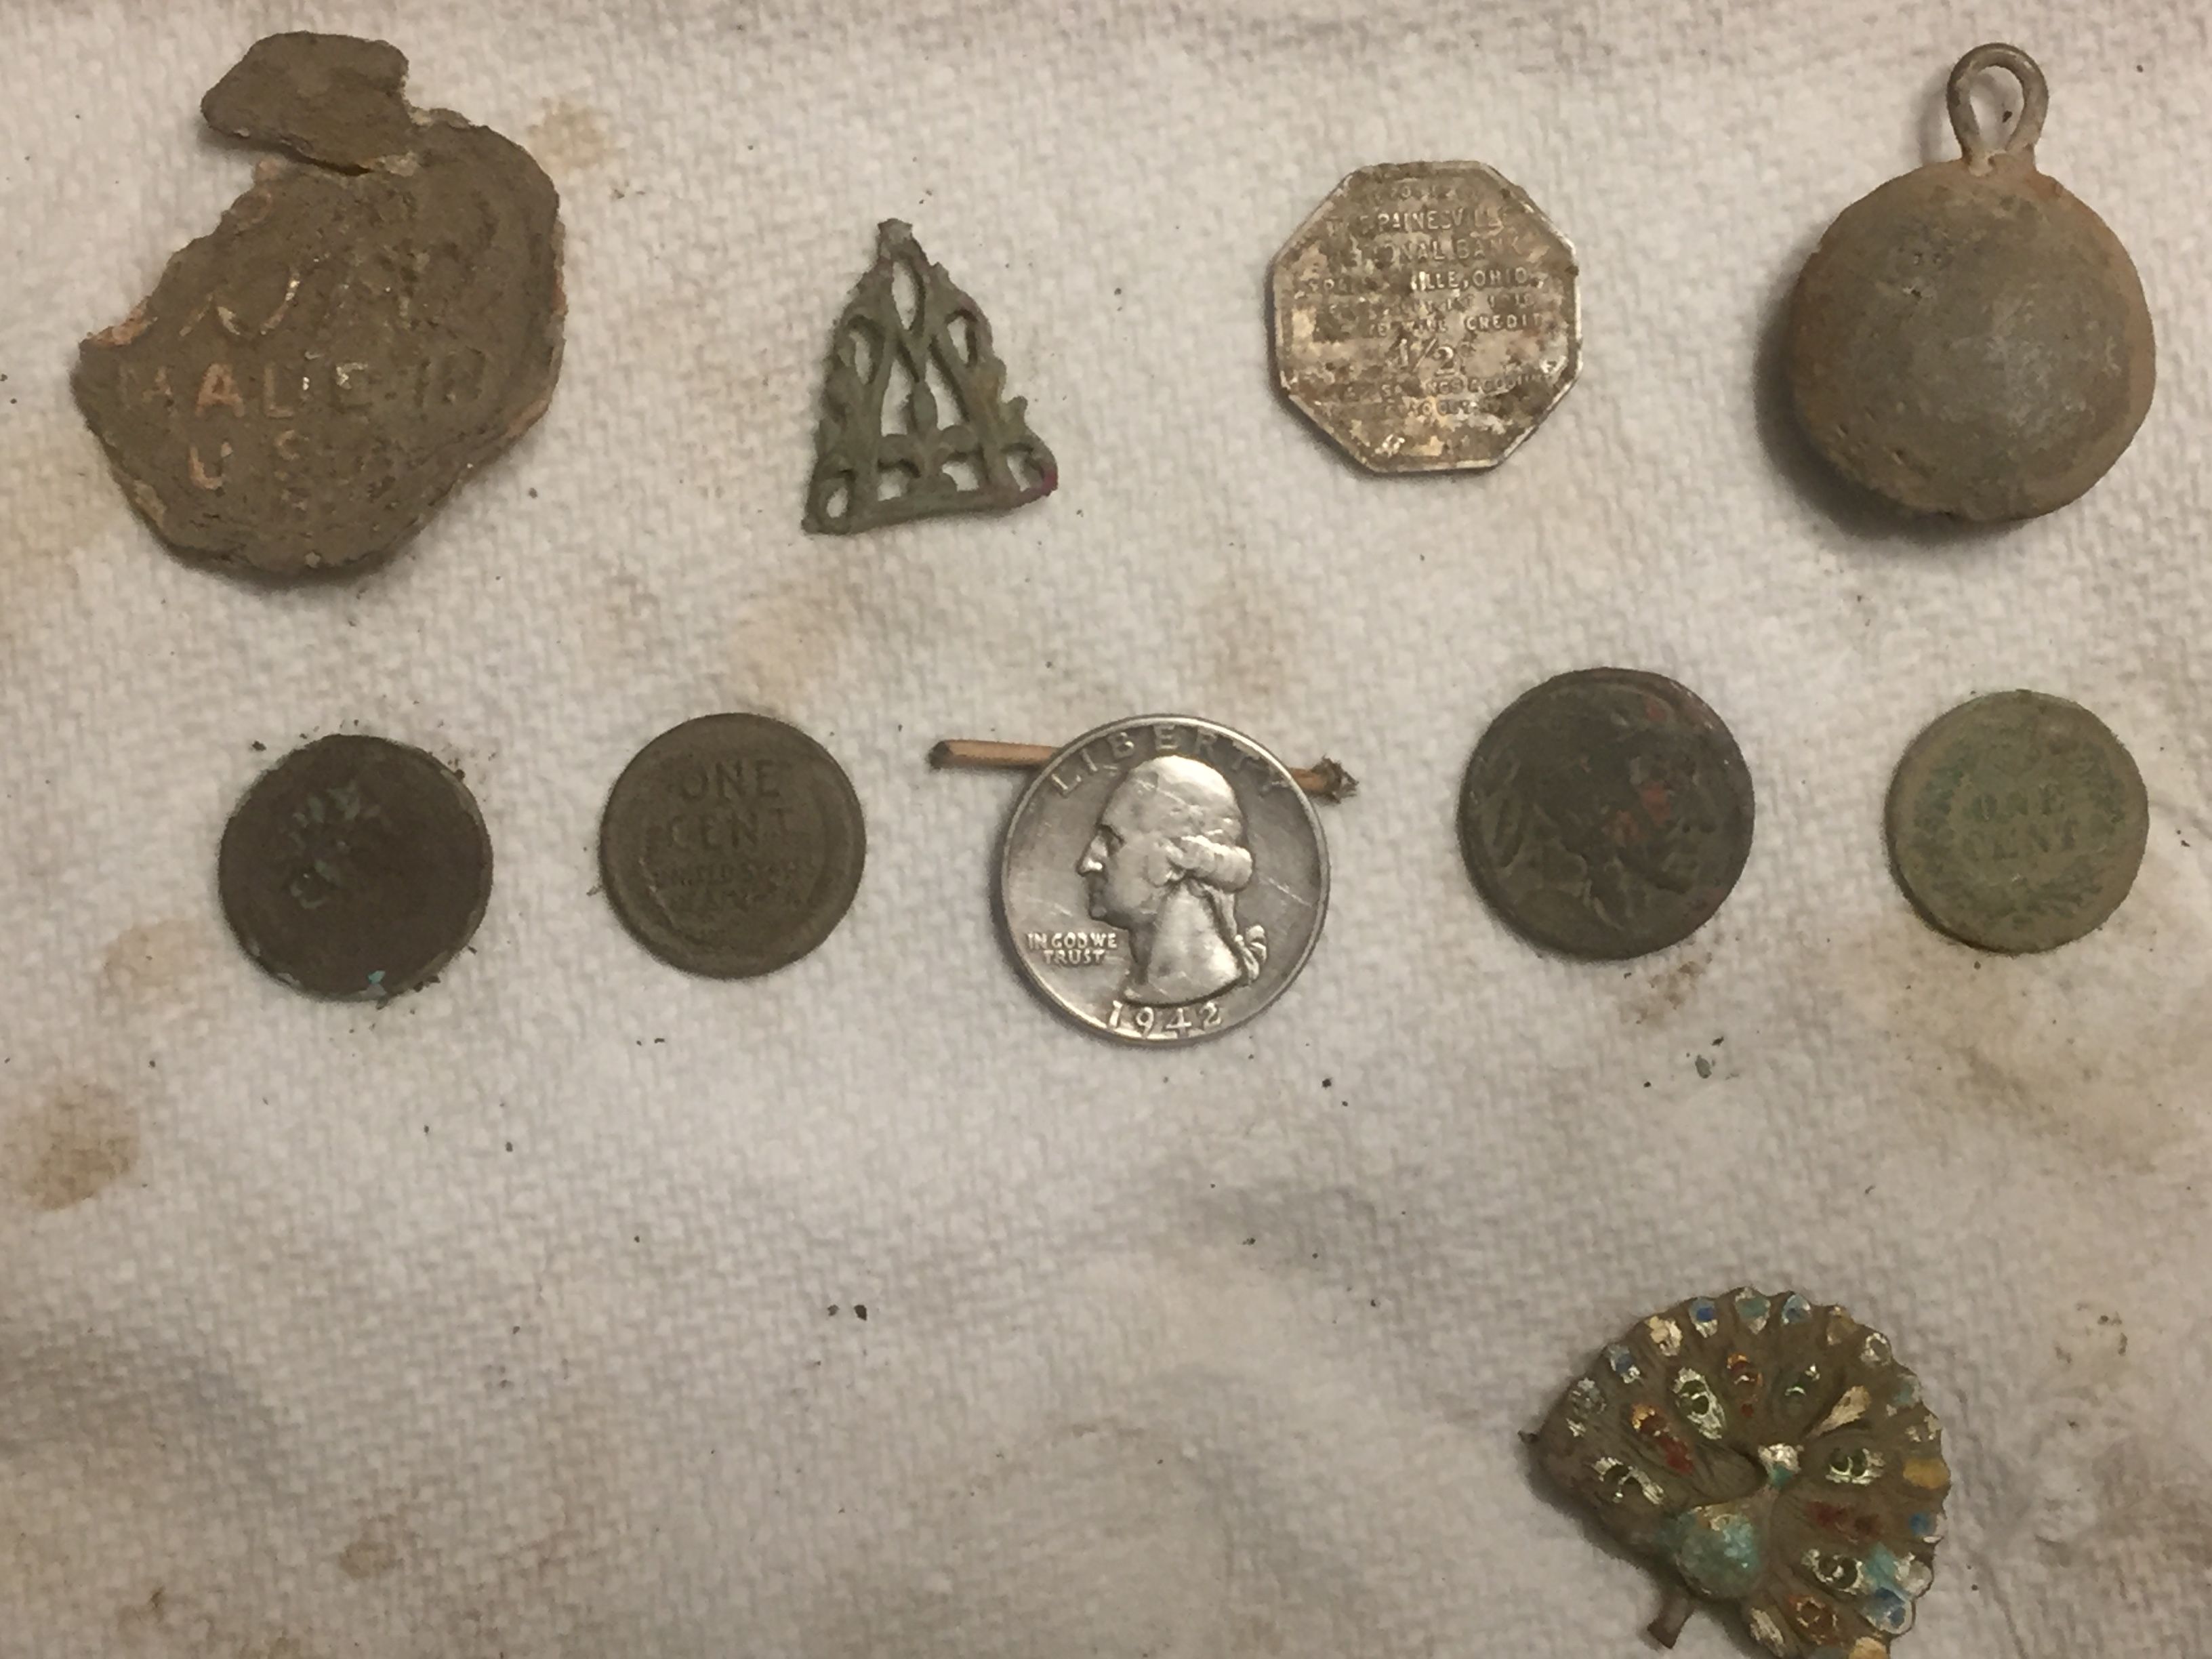 Finds 3-18-20 except for two pocket knives, and a 1948 Canada Dry